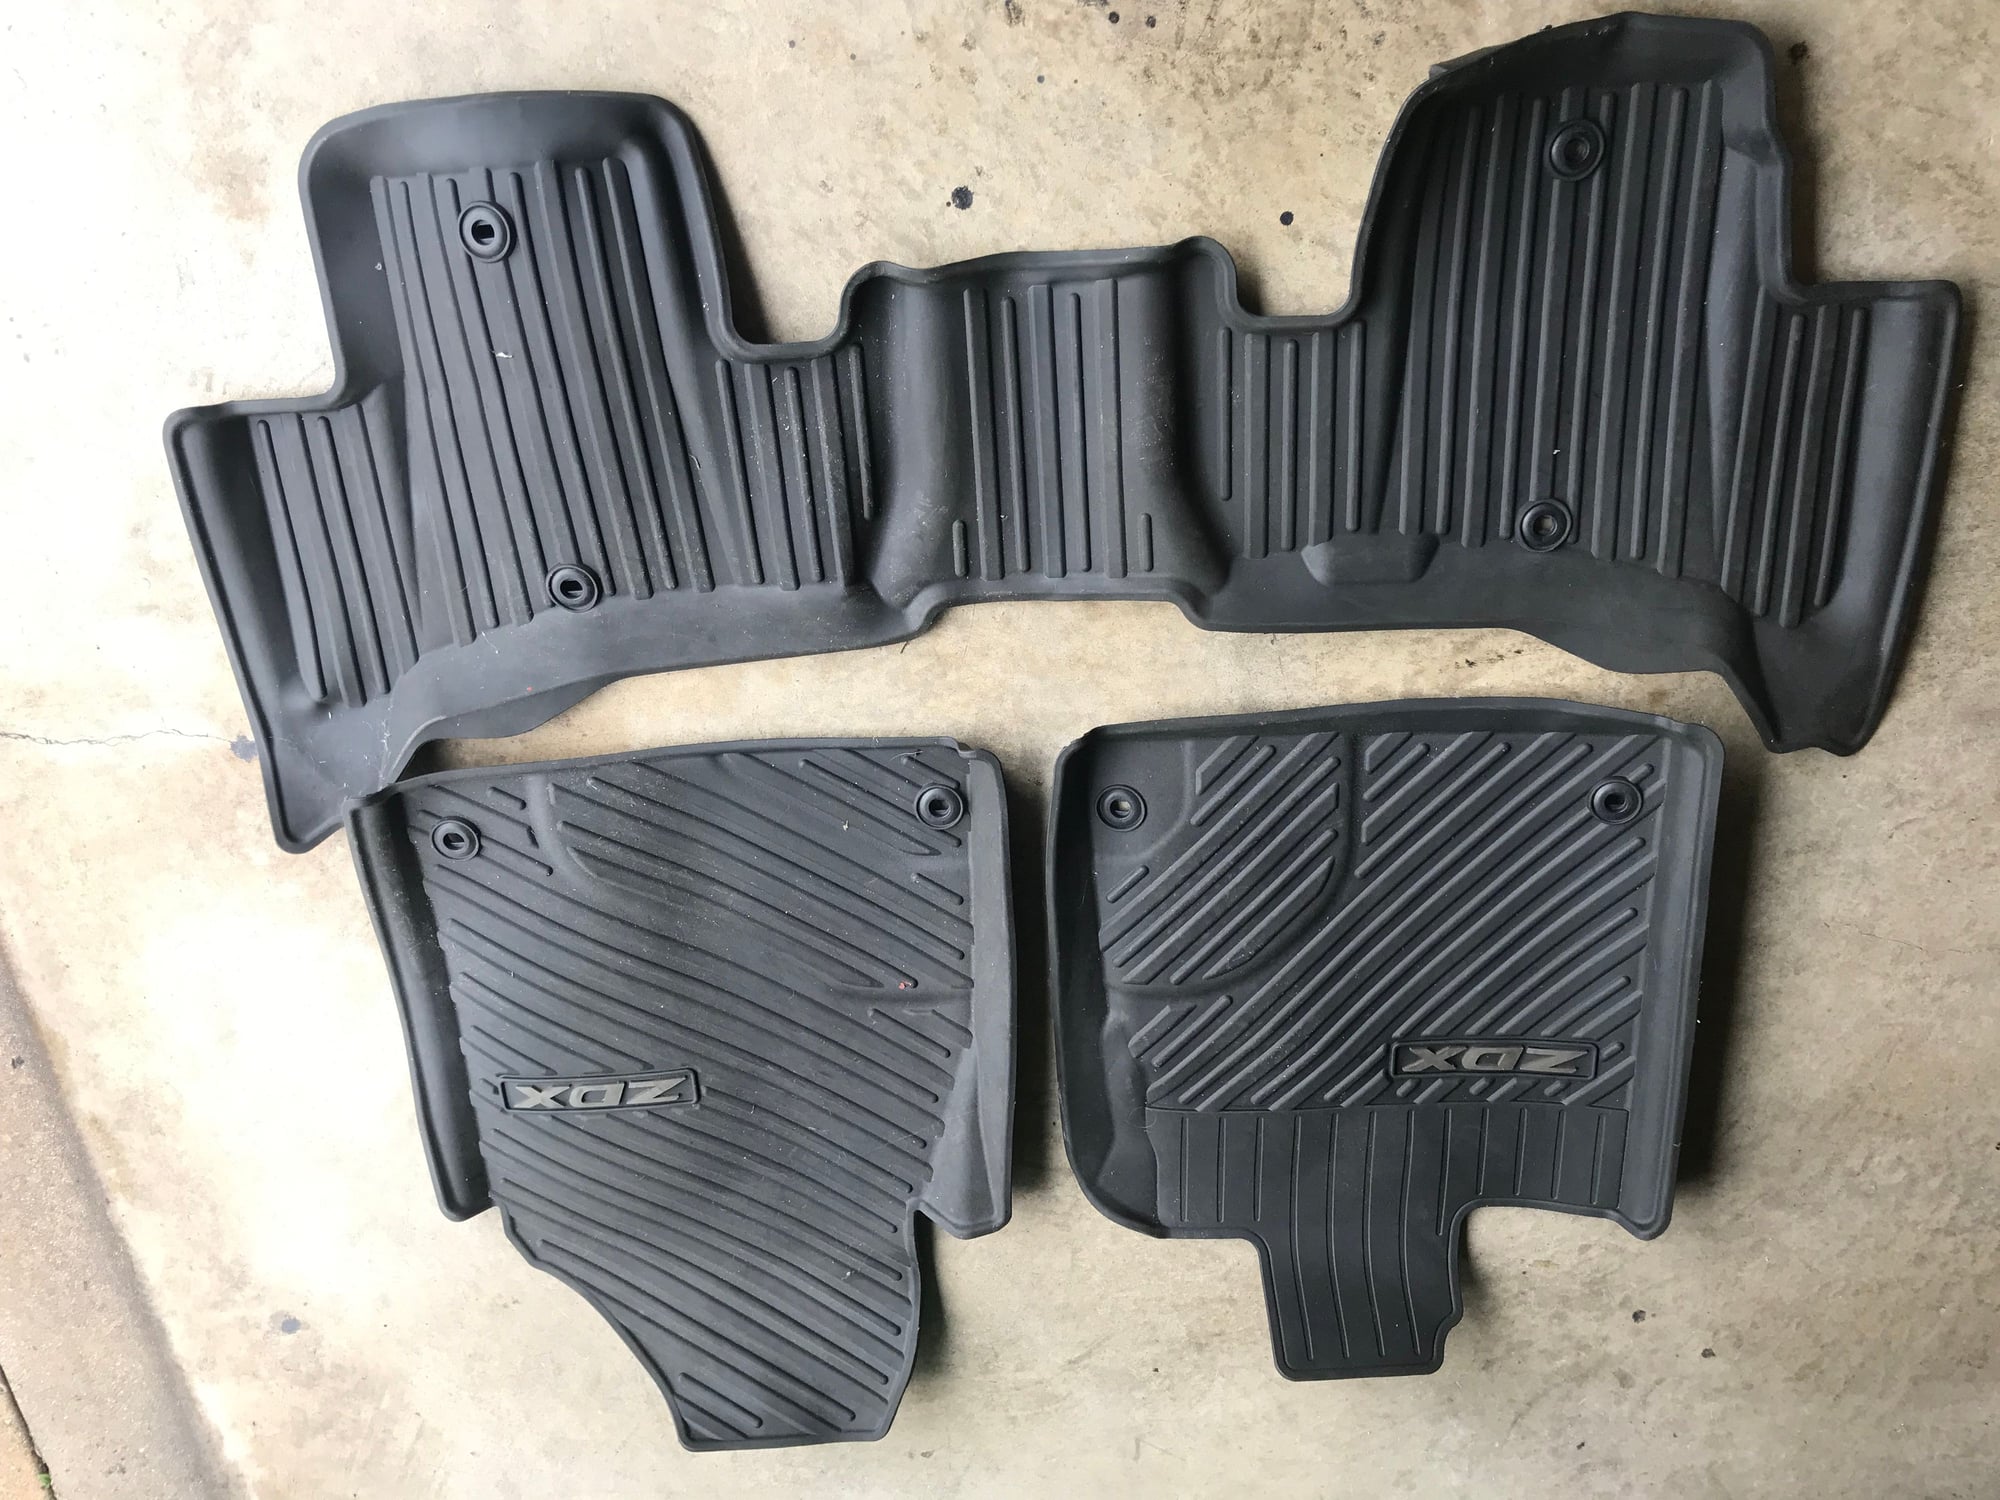 Accessories - SOLD: ZDX all weather floor mats - Used - 2010 to 2013 Acura ZDX - Irvine, CA 92620, United States